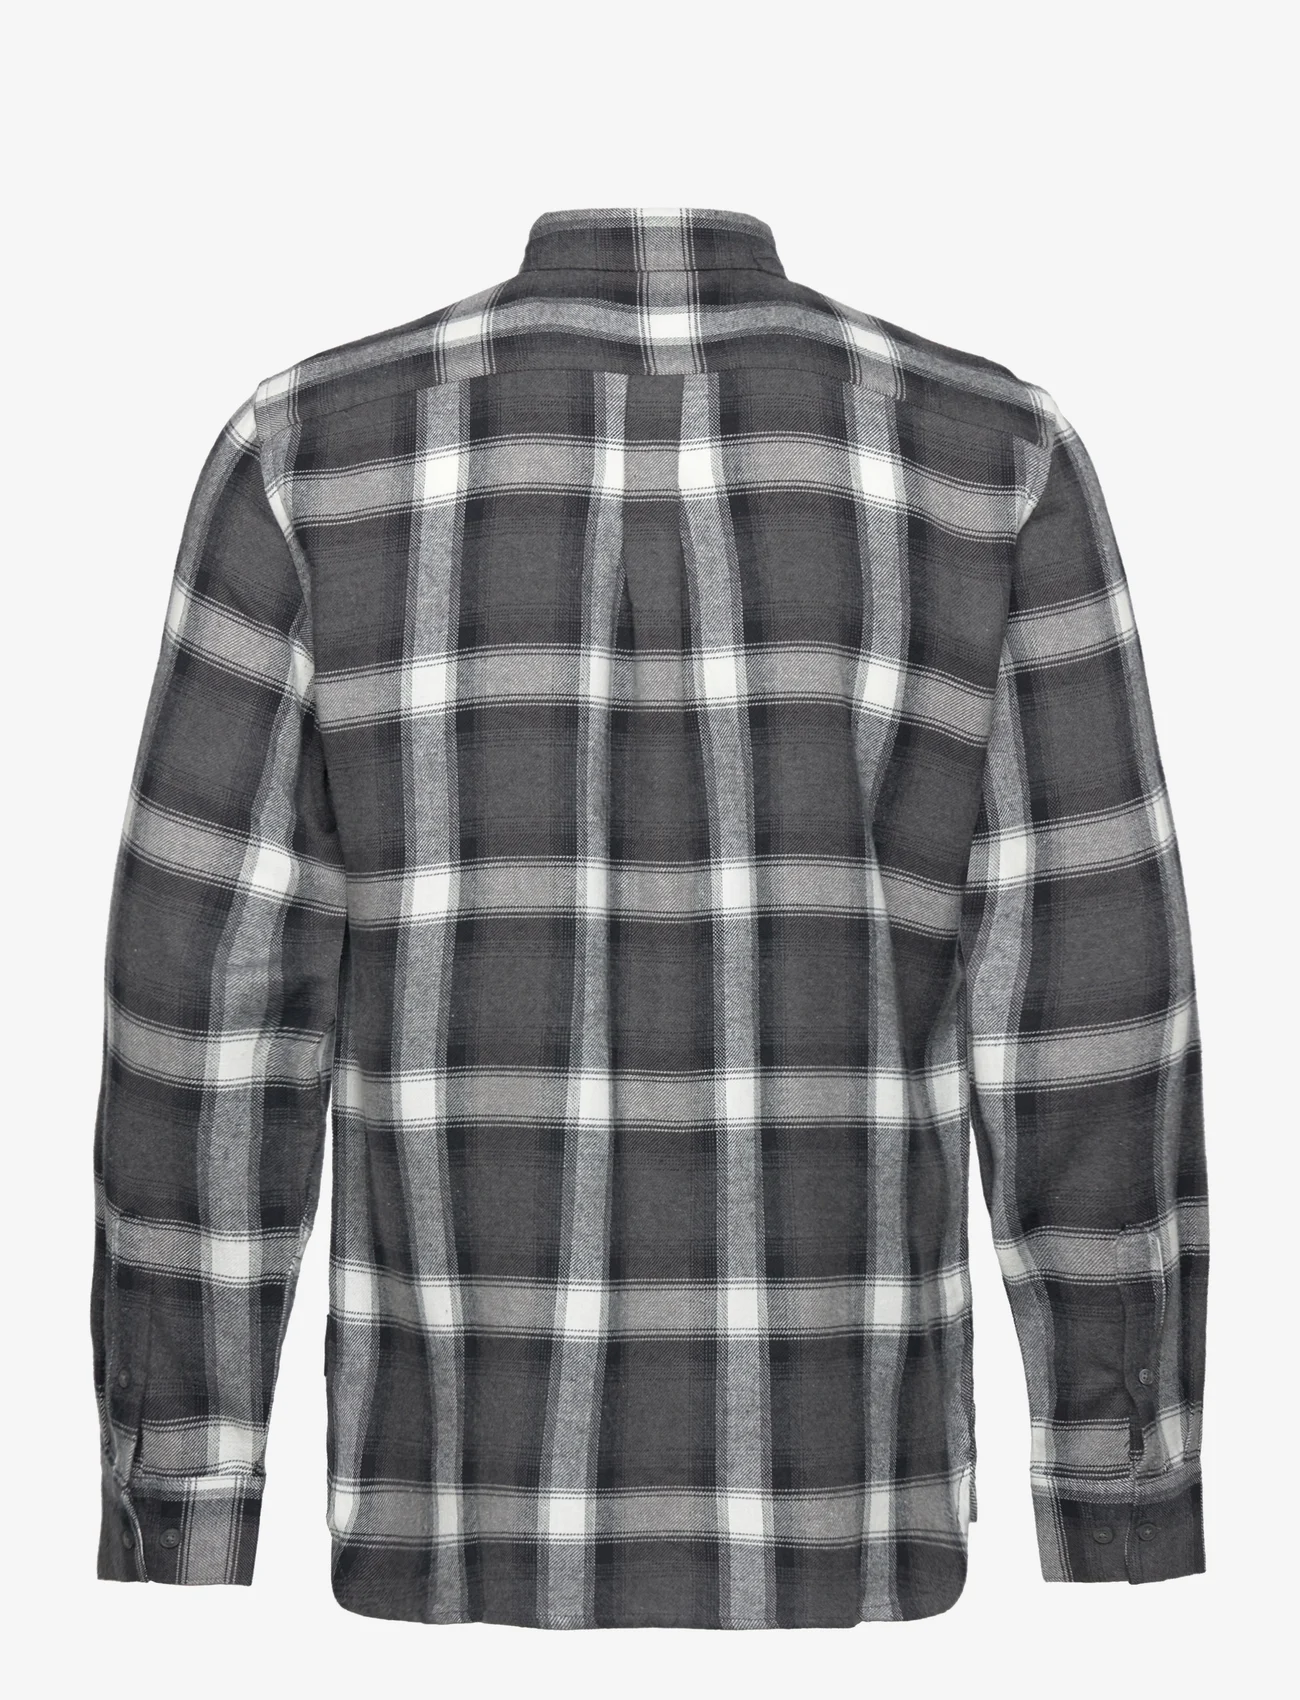 French Connection - CHECKED FLANNEL - checkered shirts - black - 1